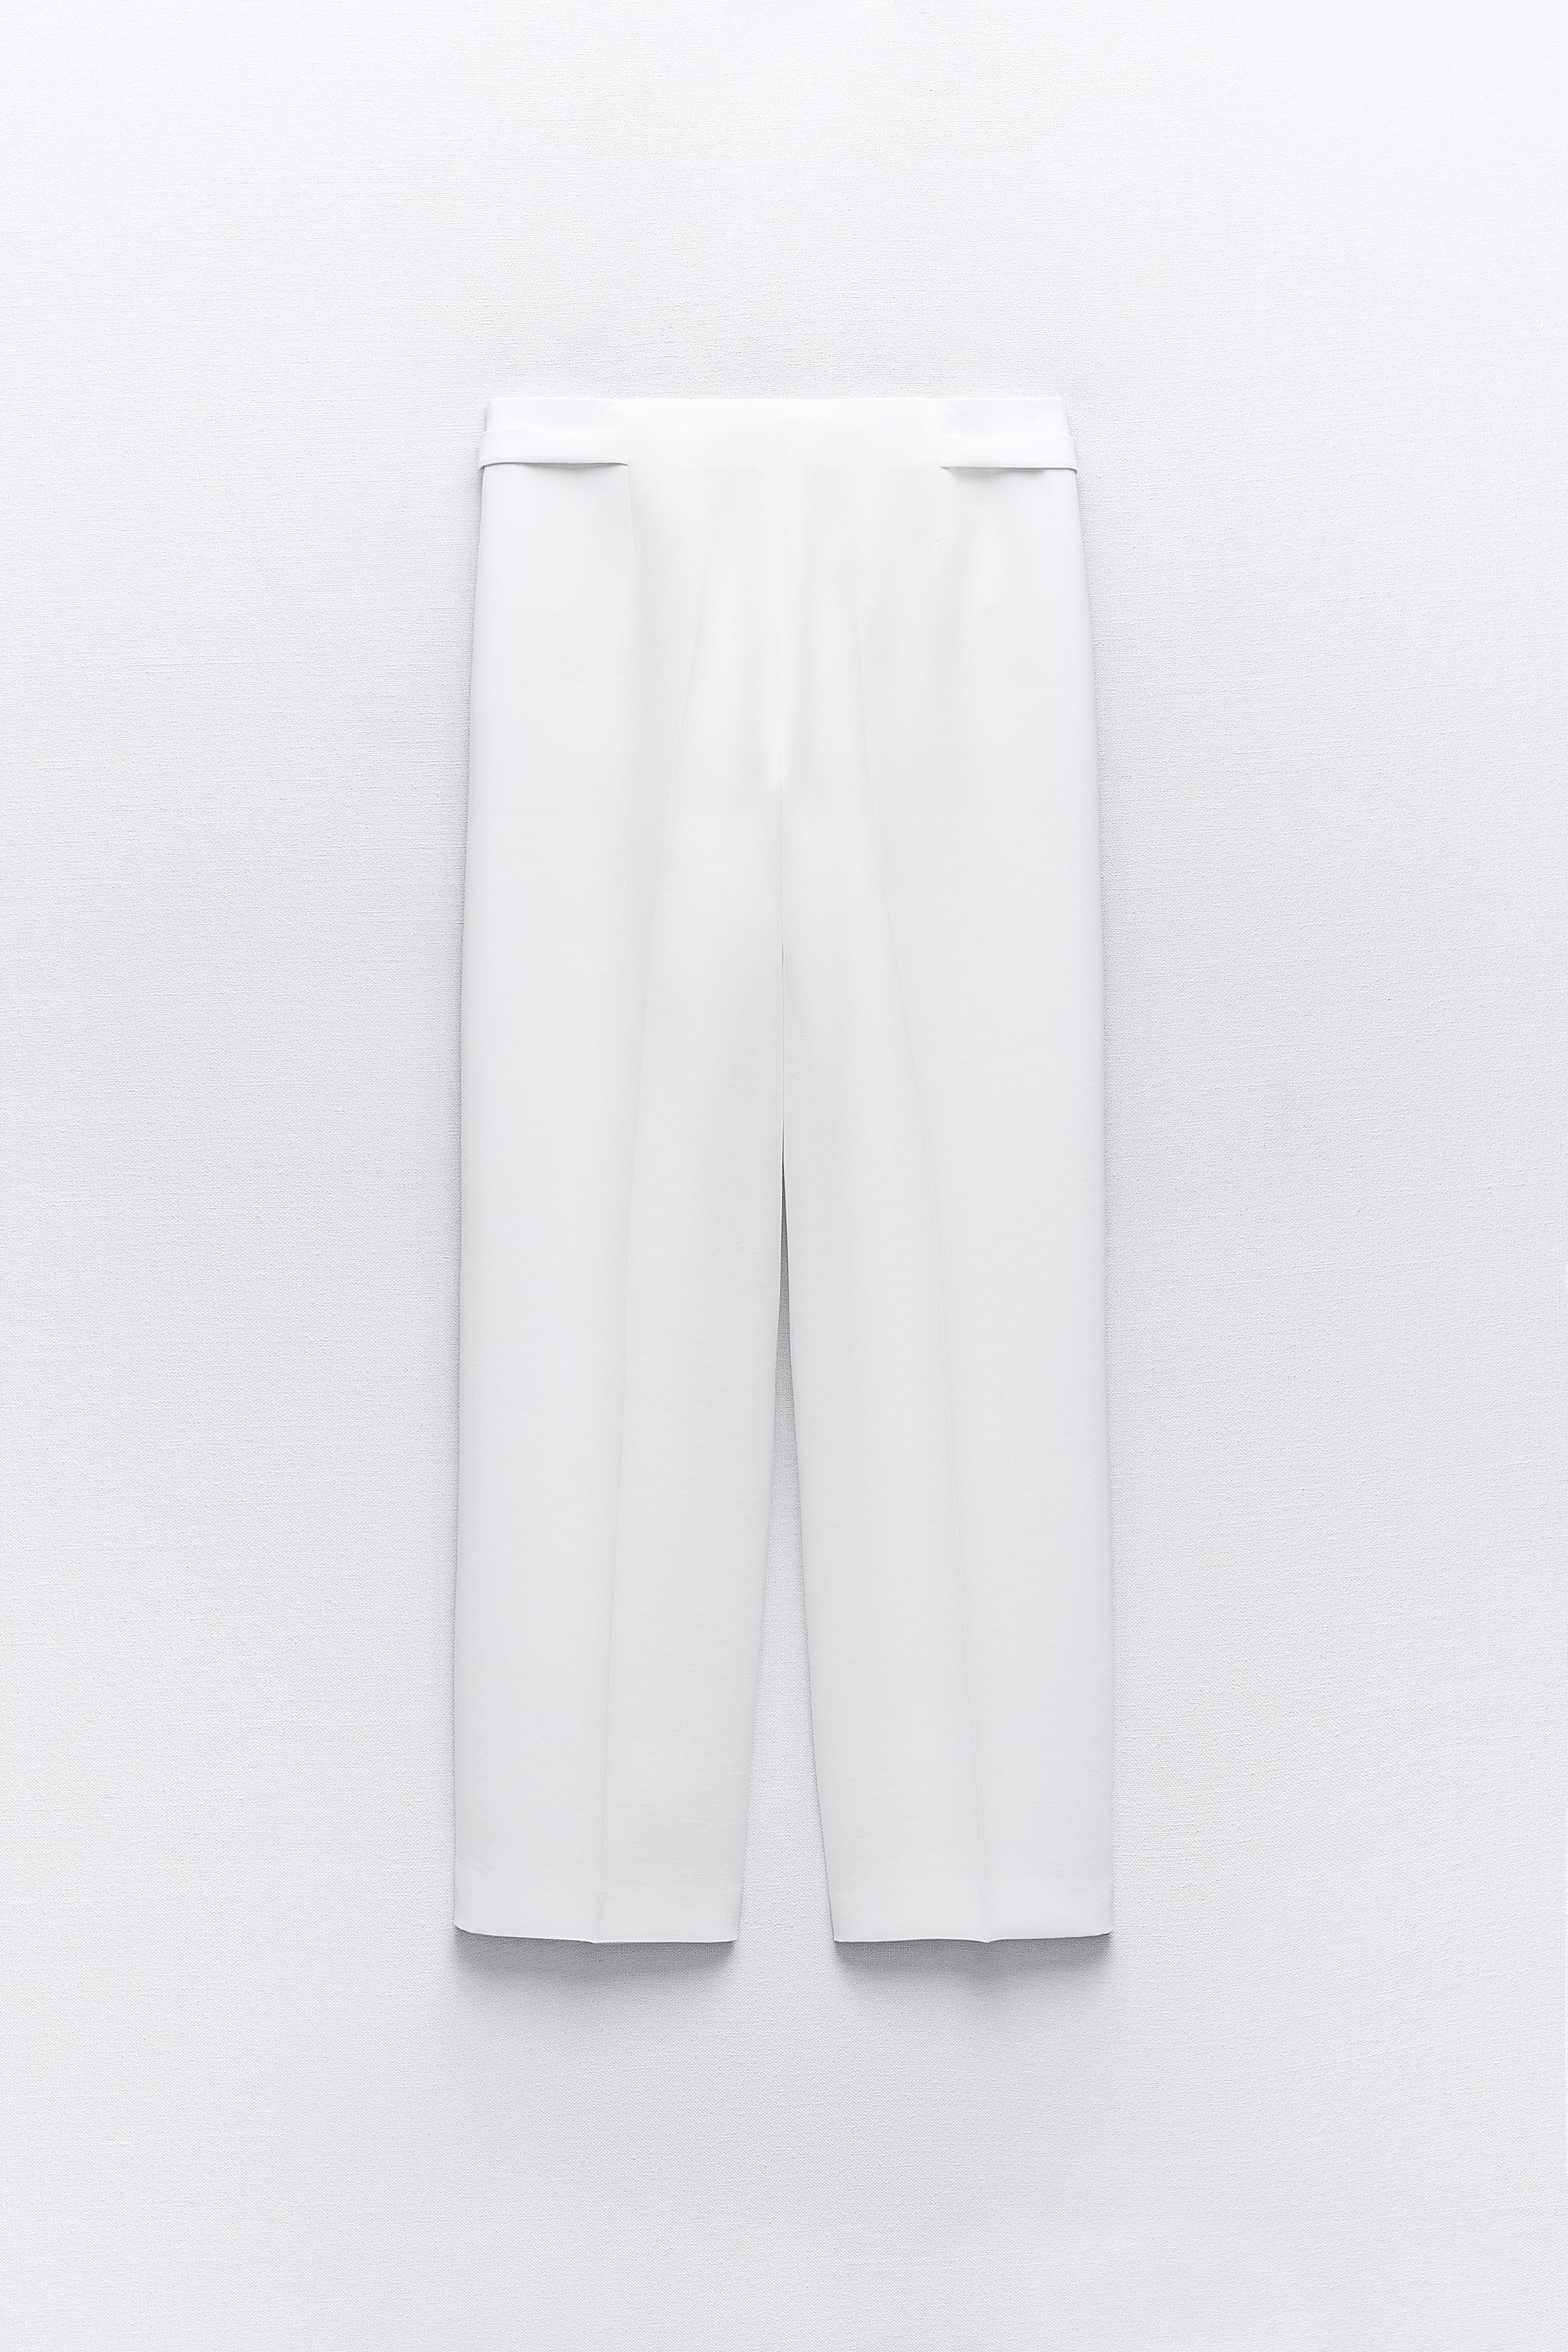 ZARA NEW WOMAN SS24 WHITE STRAIGHT-LEG TROUSERS WITH SIDE BUCKLES  REF:2599/930